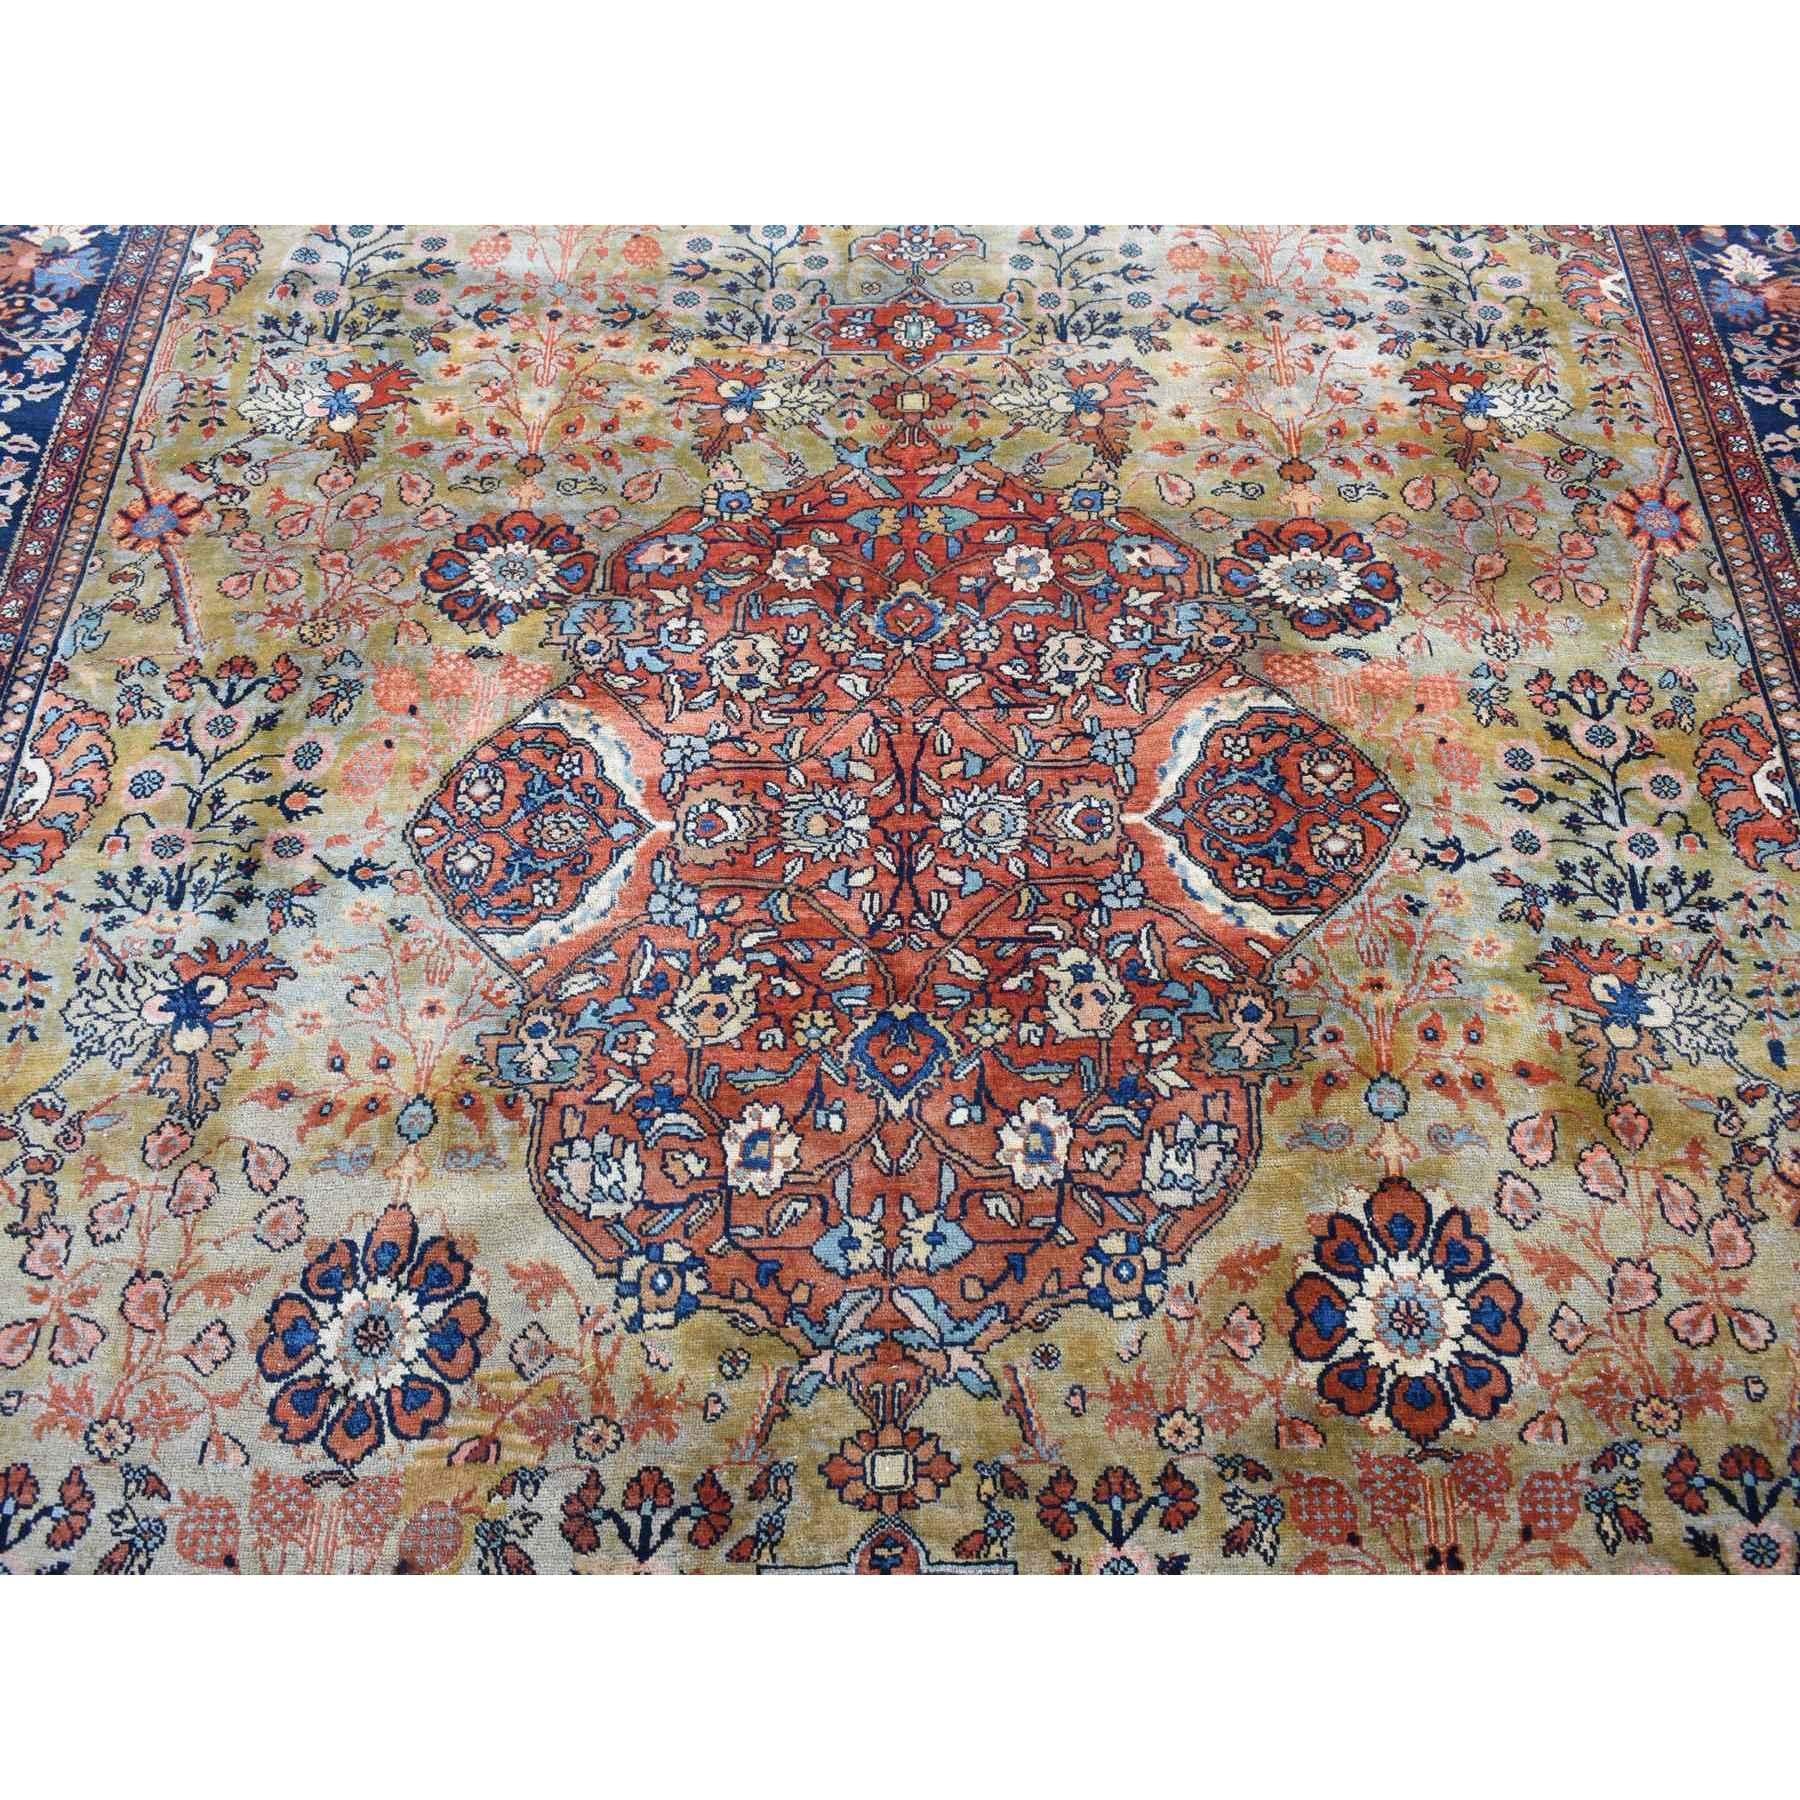 Green Rare Antique Persian Sarouk Fereghan Hand Knotted Wool Even Wear Clean Rug For Sale 2